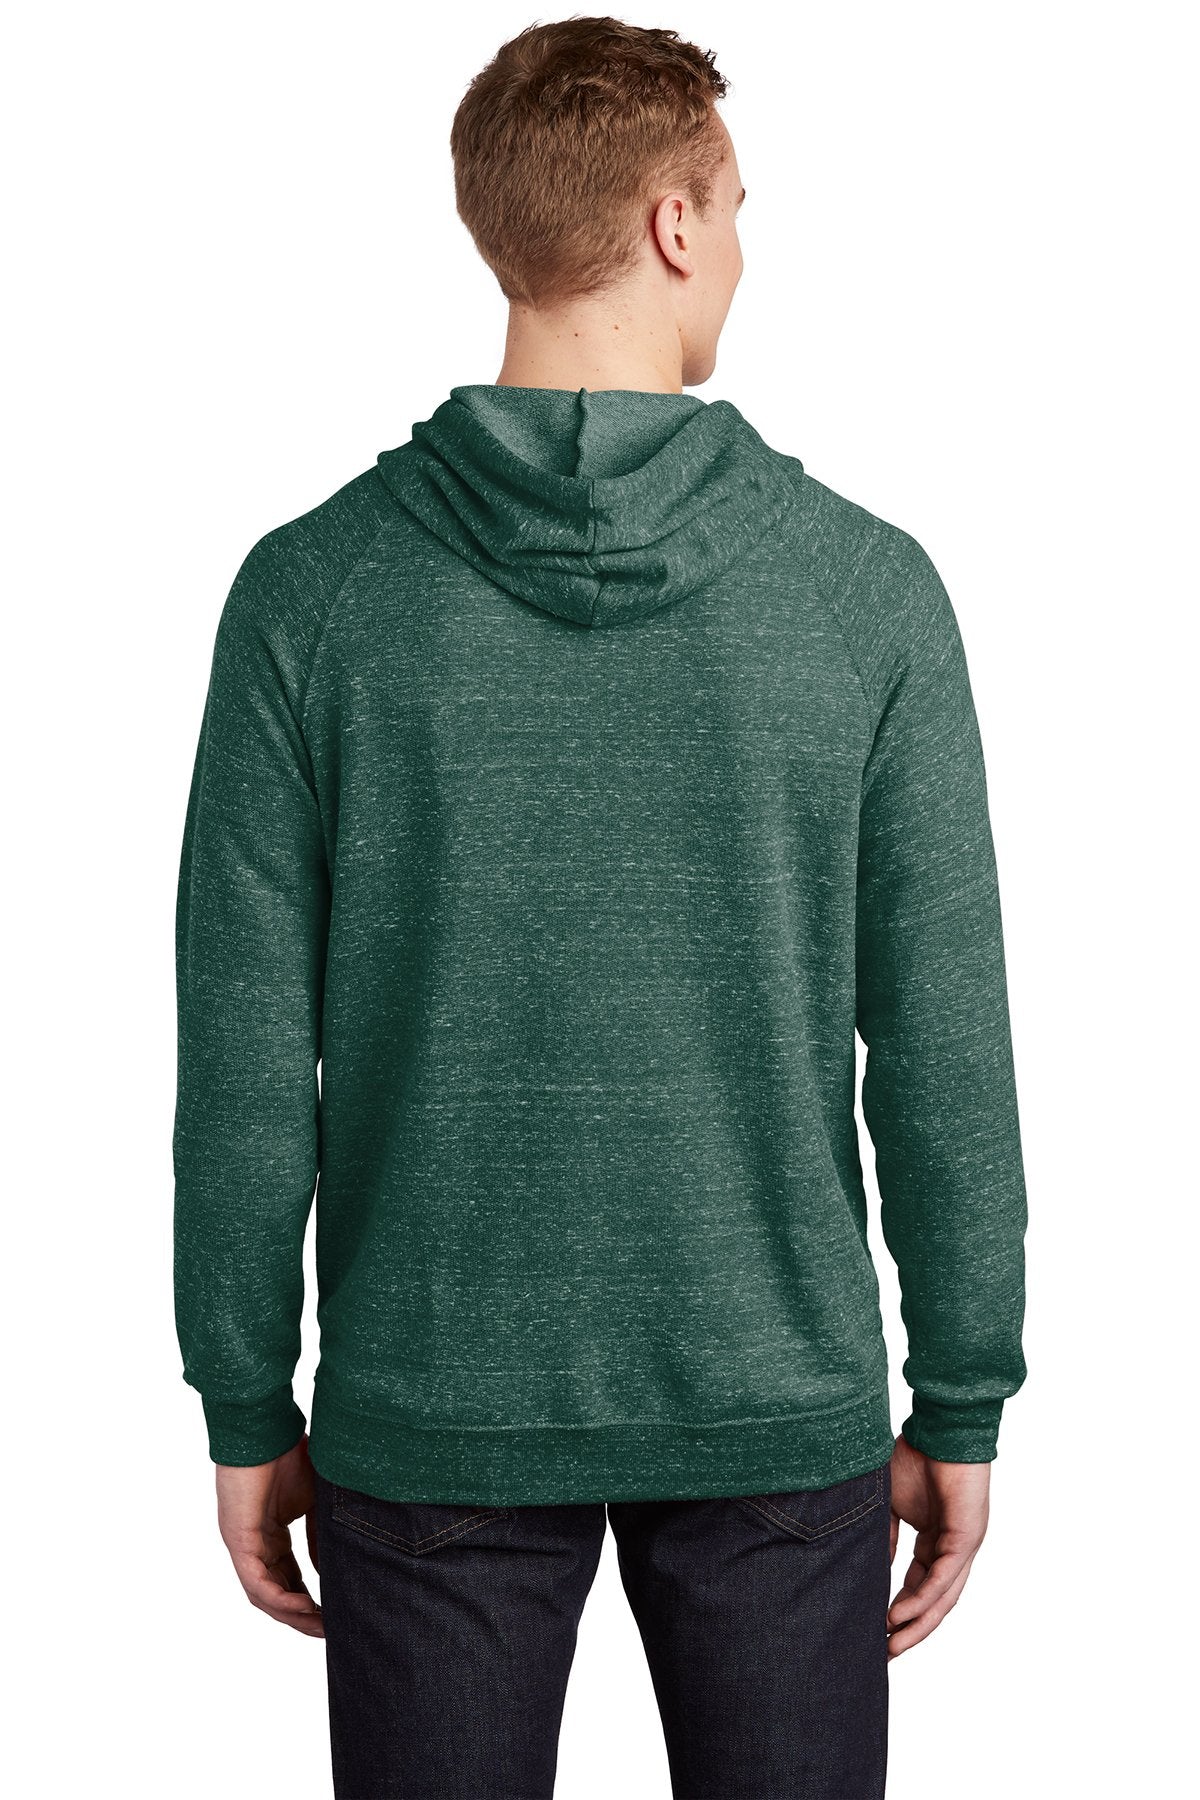 Jerzees Snow Heather French Terry Raglan Hoodie 90M Forest Green